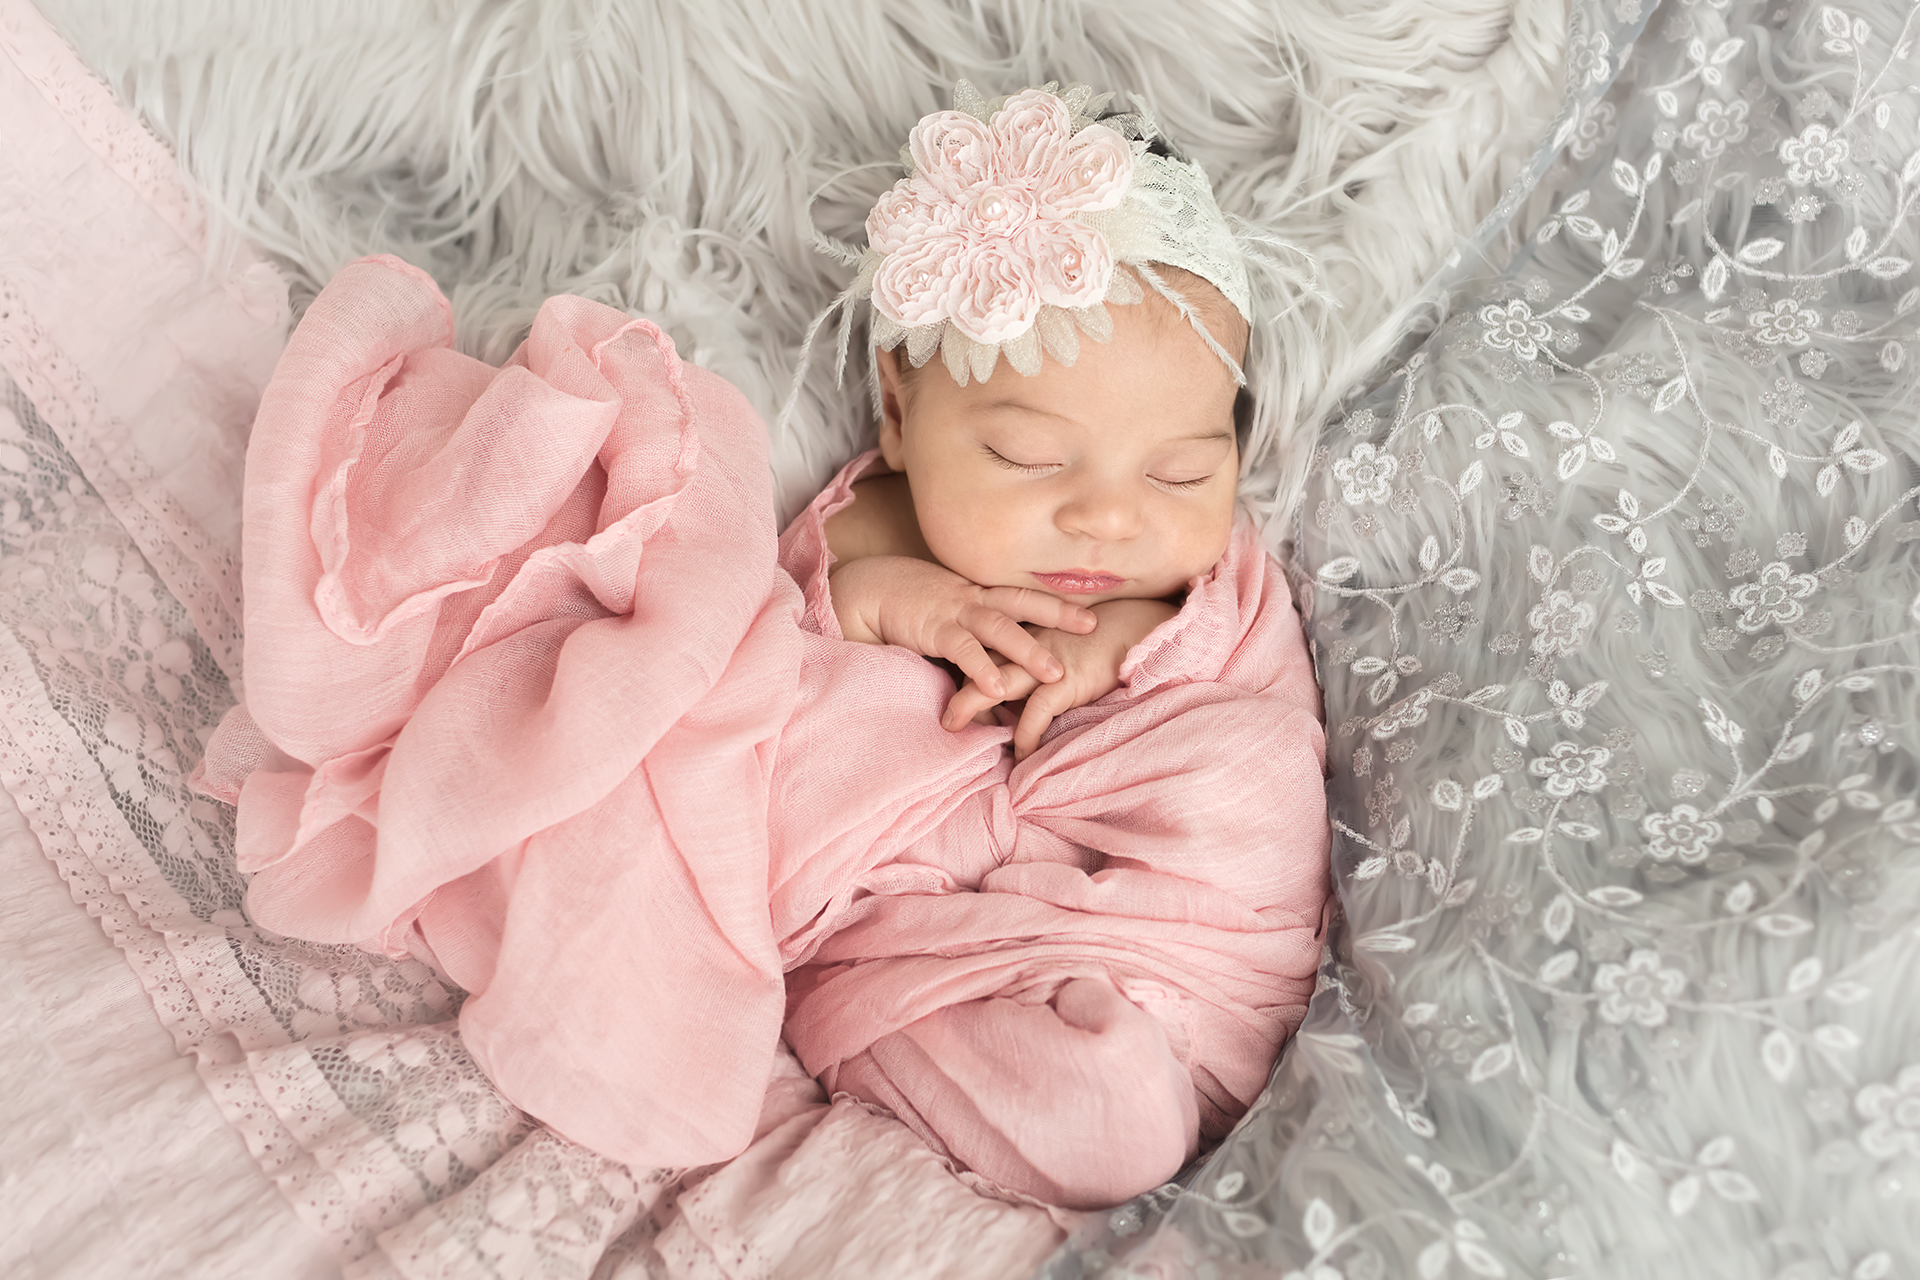 Baby girl swaddled in a pink wrap shaped like a heart and a gorgeous pink and white flower headband peach surrounded by gray and pink lace and gray fur for a Newborn portrait session